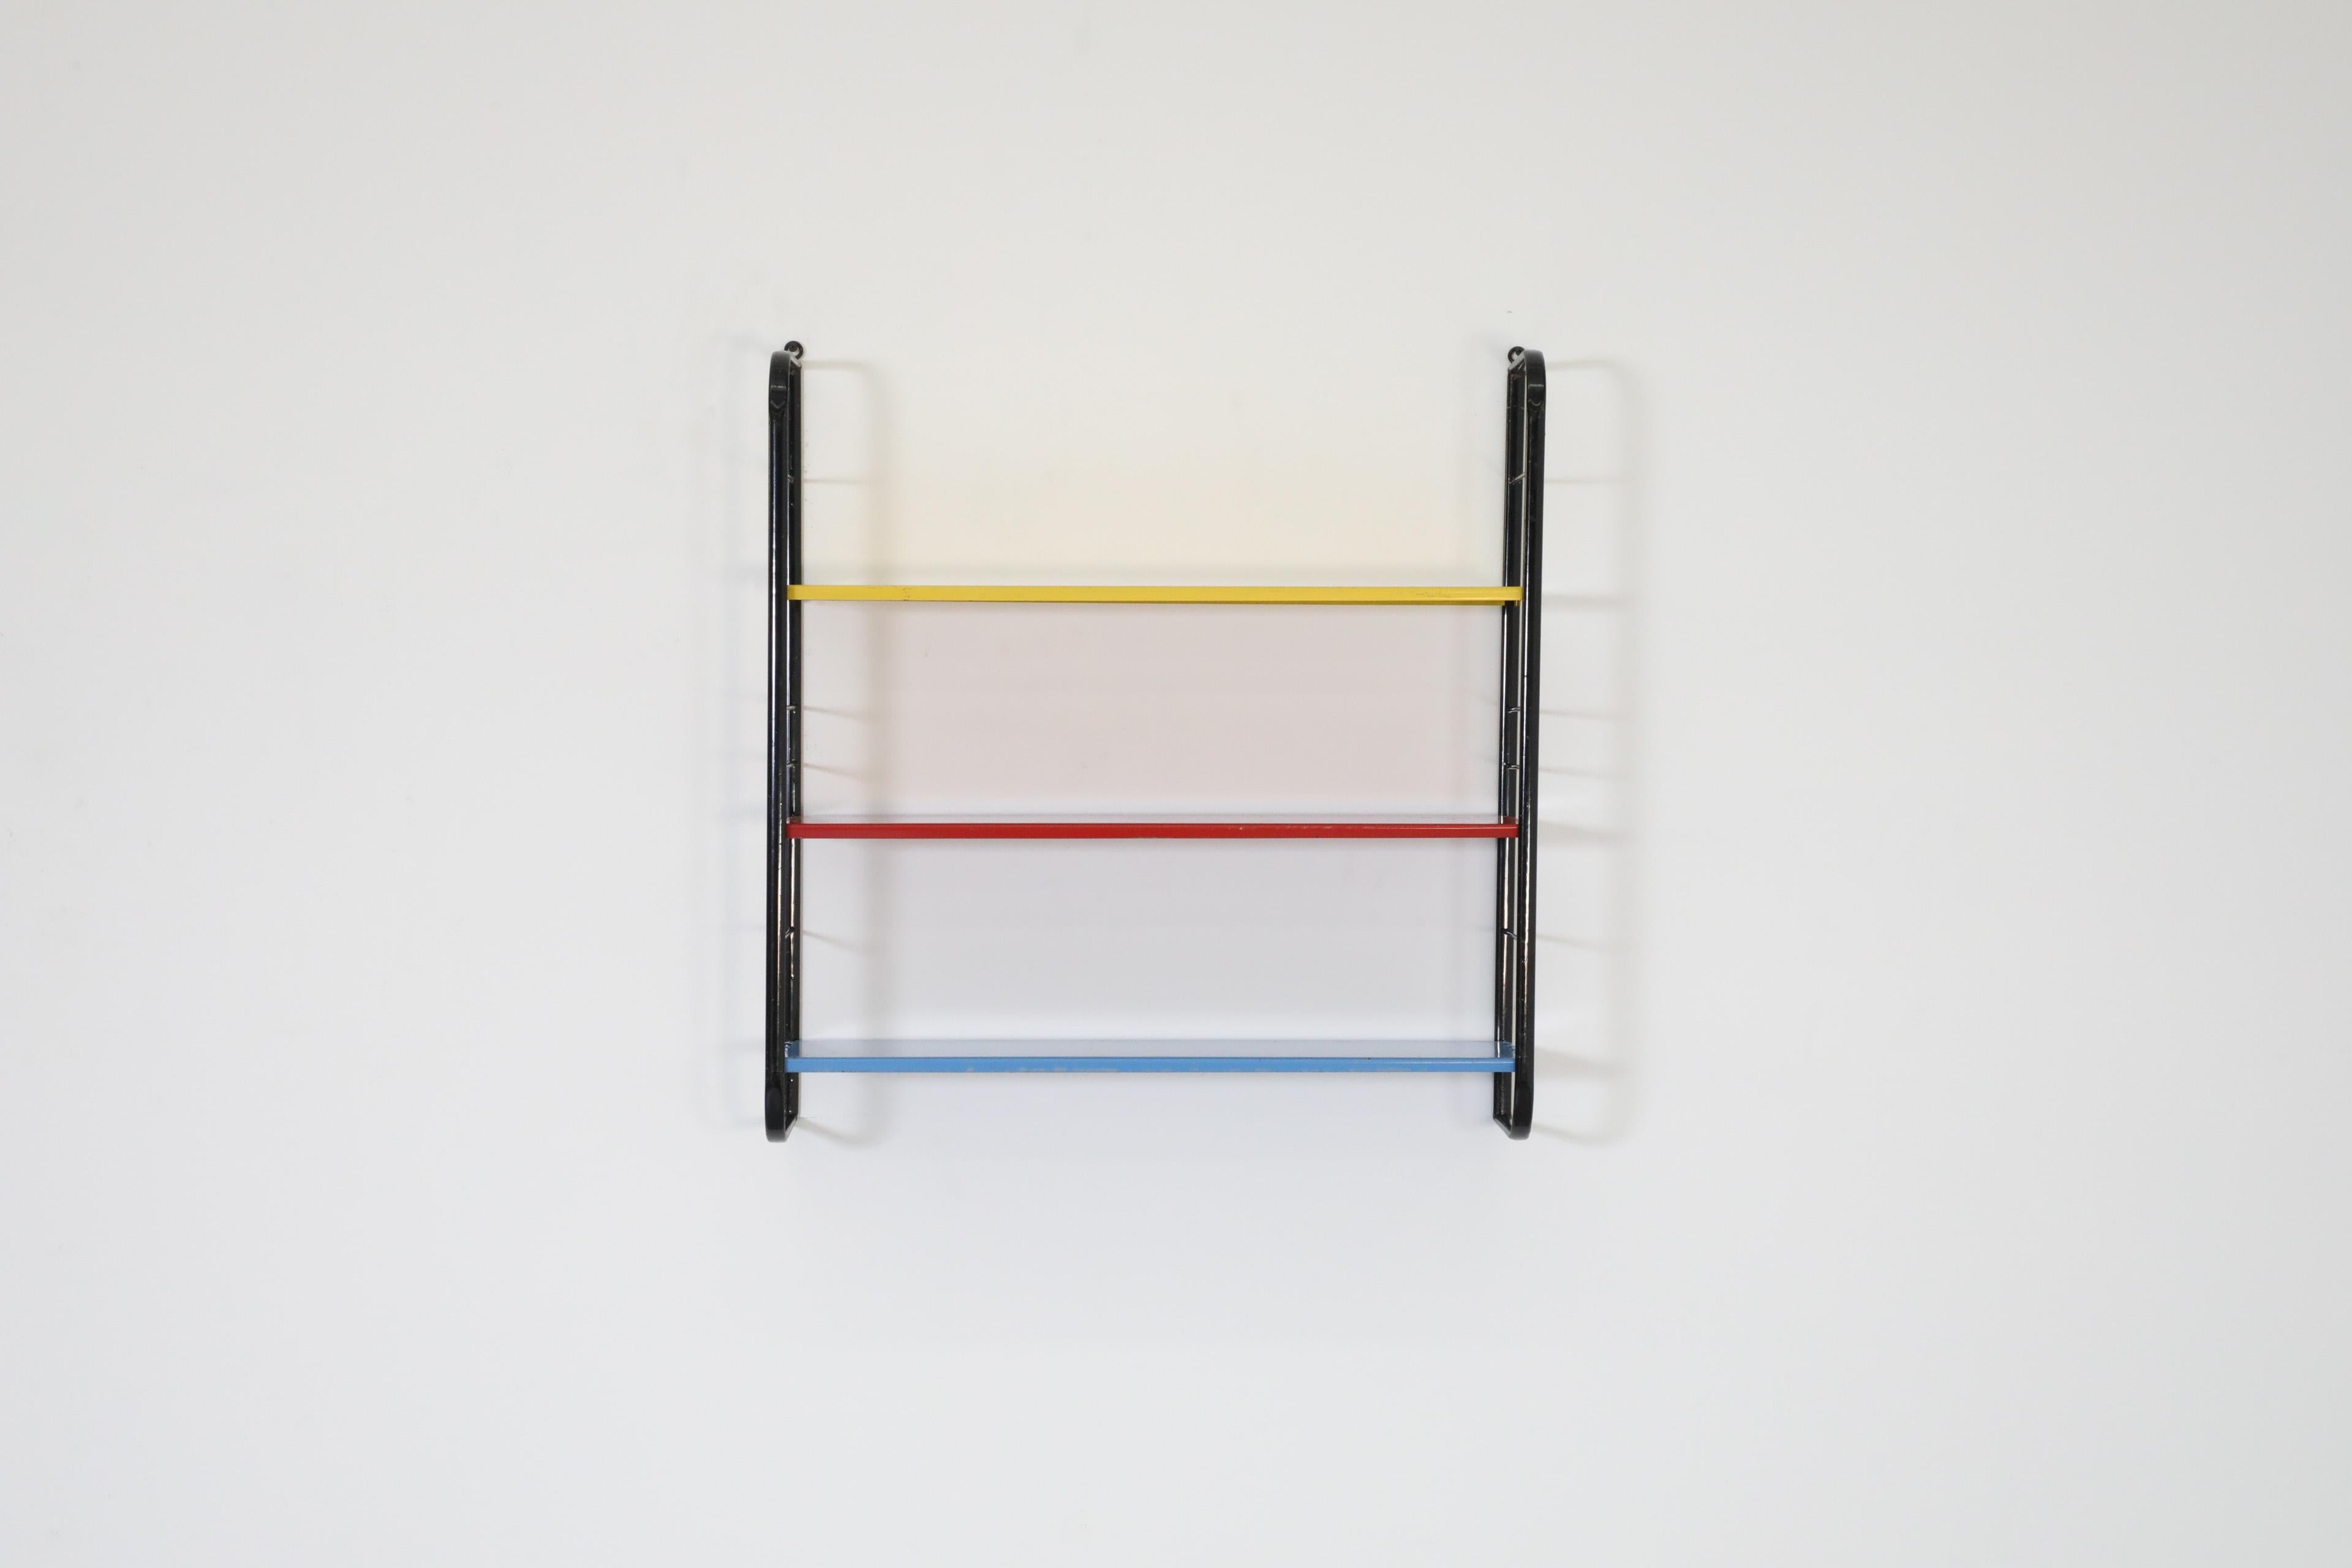 Mid-Century Modern Tomado Style Wall Shelving Unit w/ Black Frame and Yellow, Red, & Blue Shelves For Sale